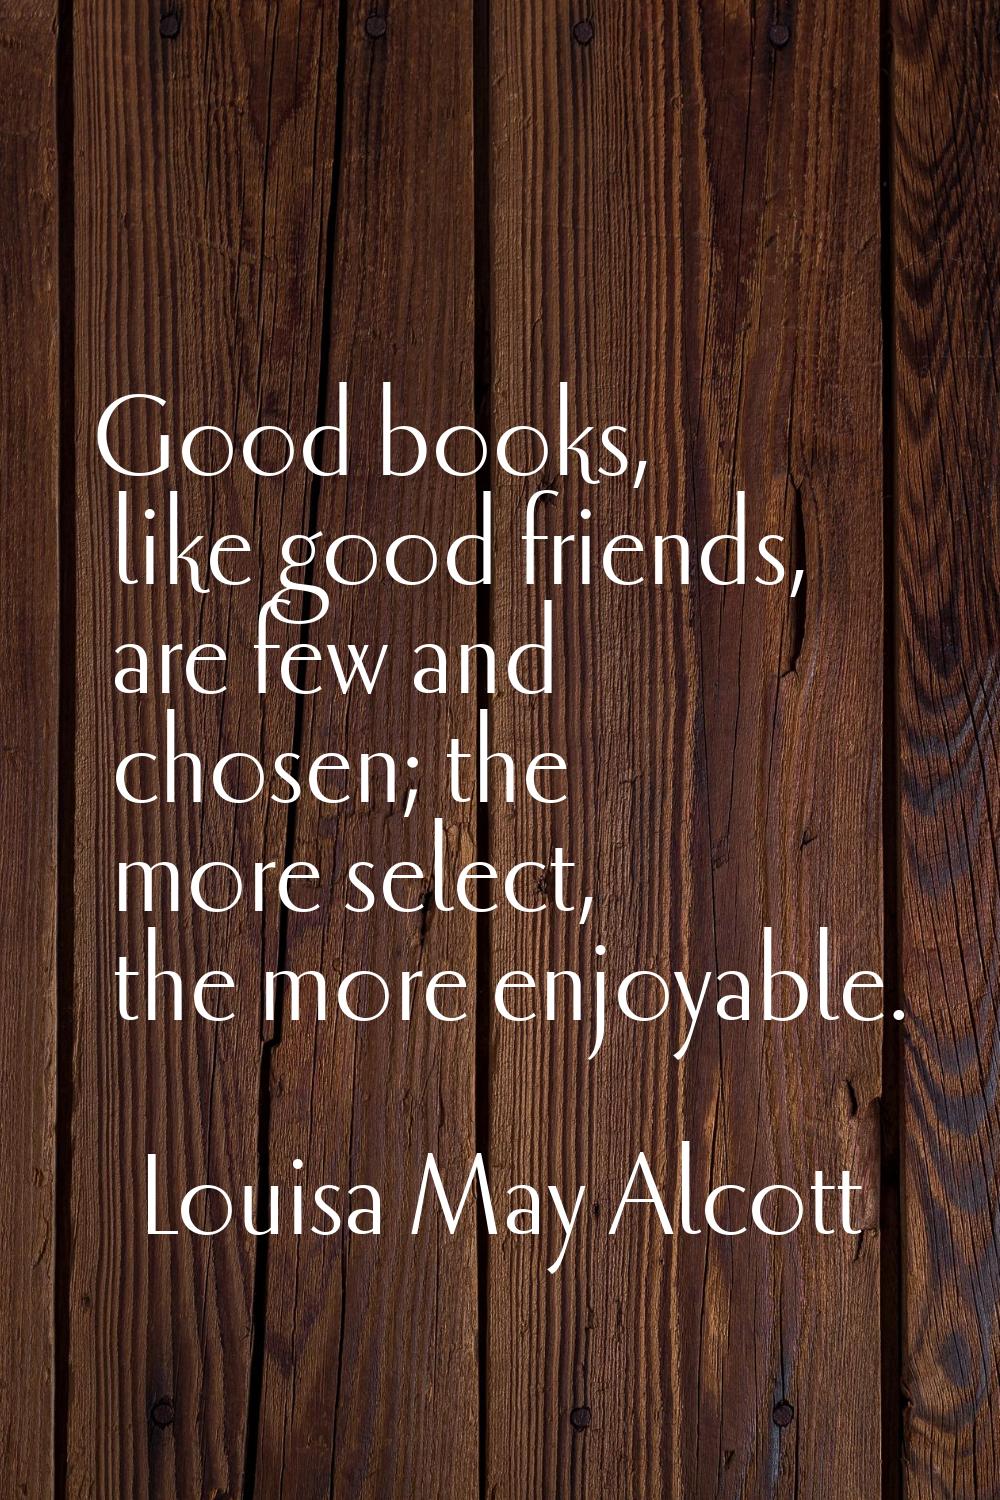 Good books, like good friends, are few and chosen; the more select, the more enjoyable.